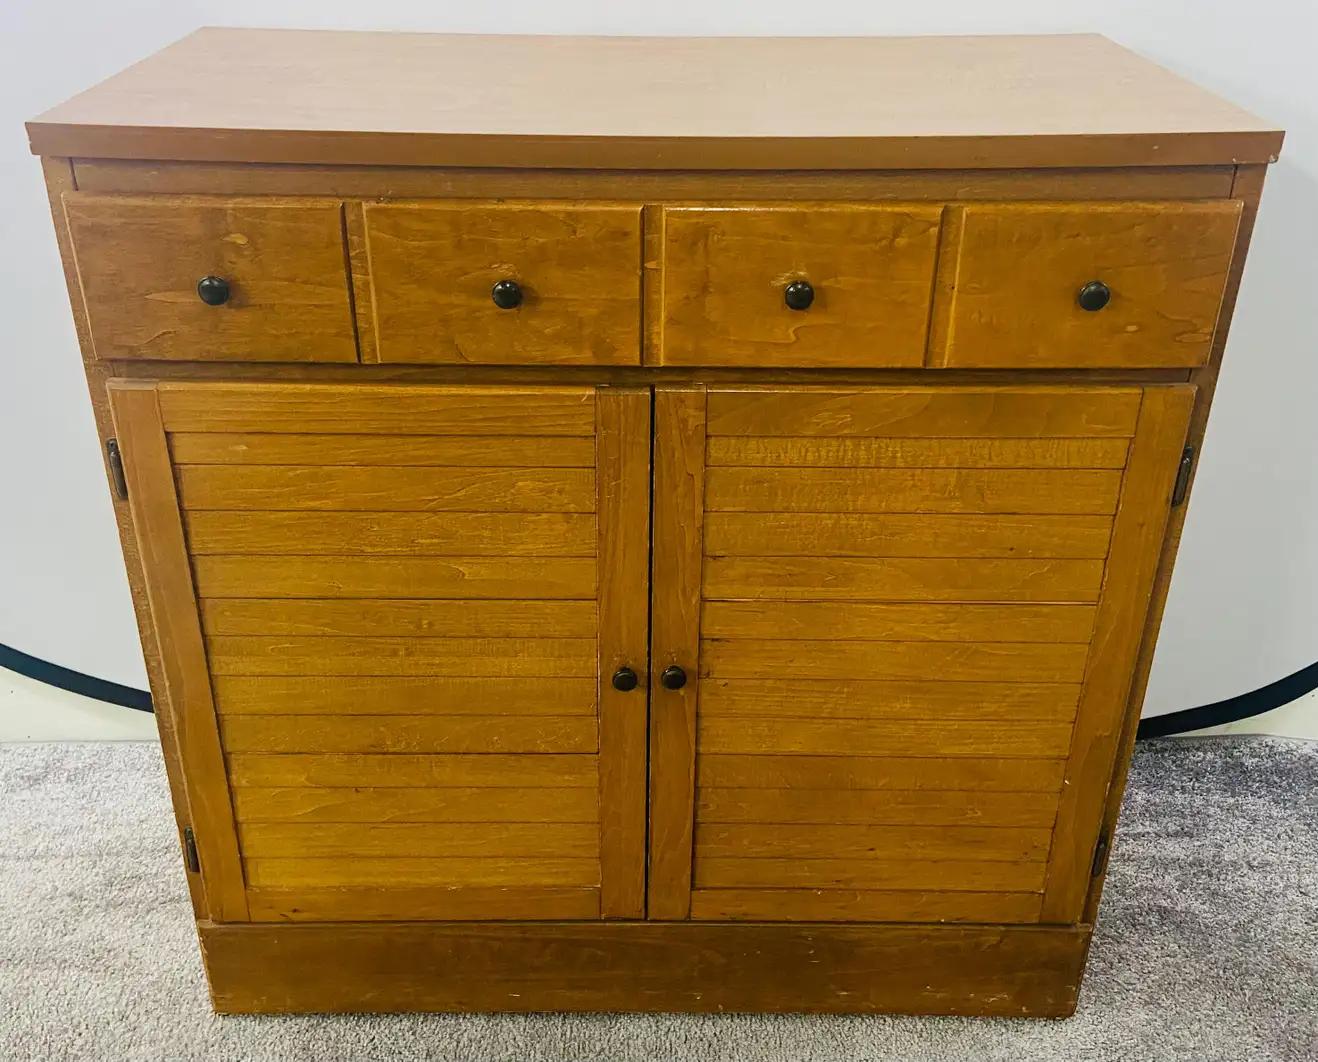 A charming and elegant Mid Century Modern nightstand, chest or cabinet. The MCM chest features a one large drawer over two door cabinet opening to reveal one shelf for additional storage room. The drawer has four nobs to look as four drawers. All